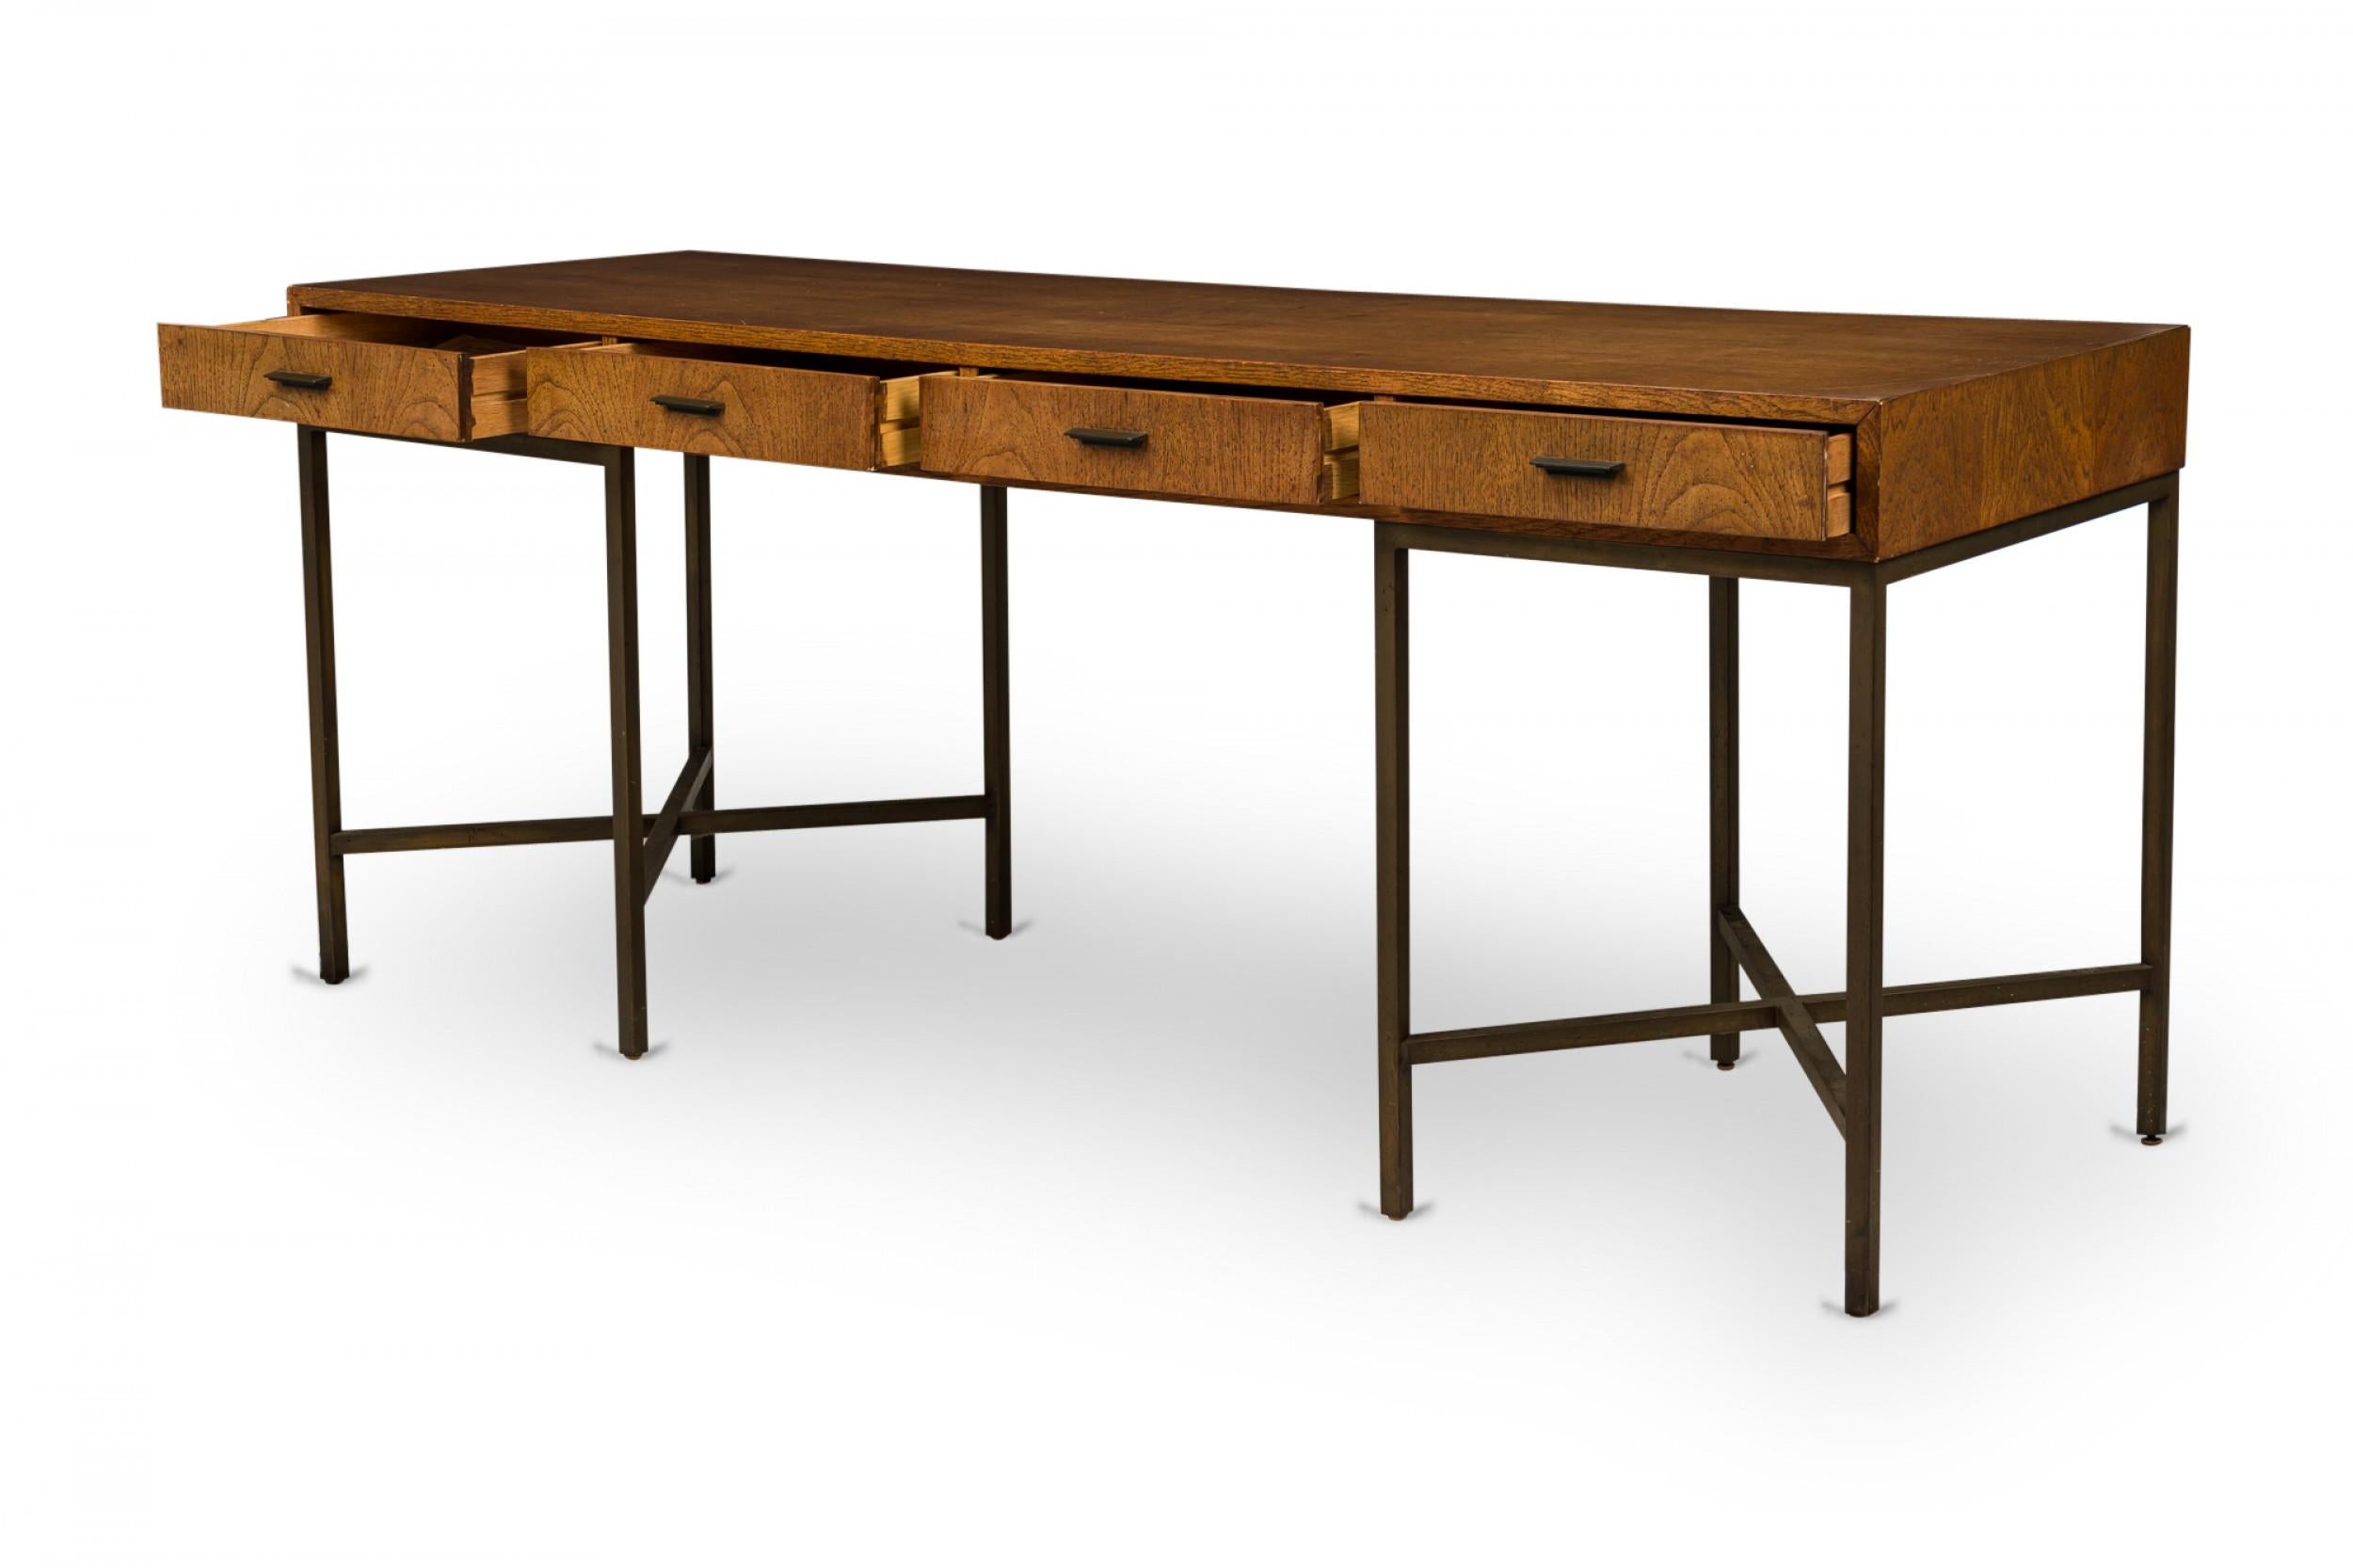 20th Century Founders Furniture Co. Rectangular Walnut and Bronze Desk For Sale